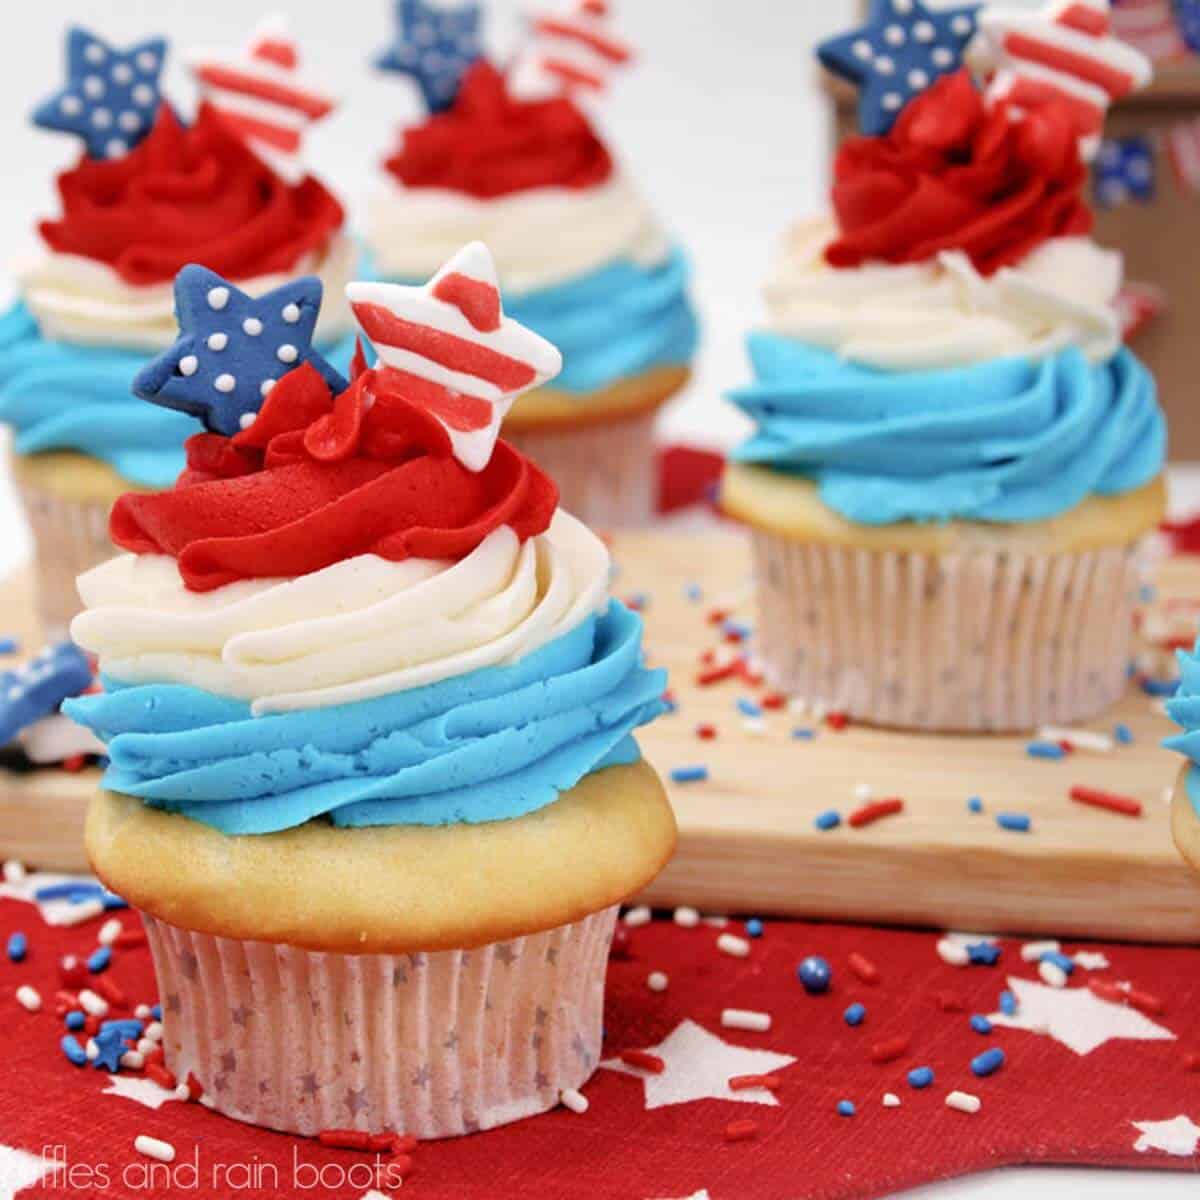 Square close up image of 4th of July cupcakes with red white and blue frosting and stars.